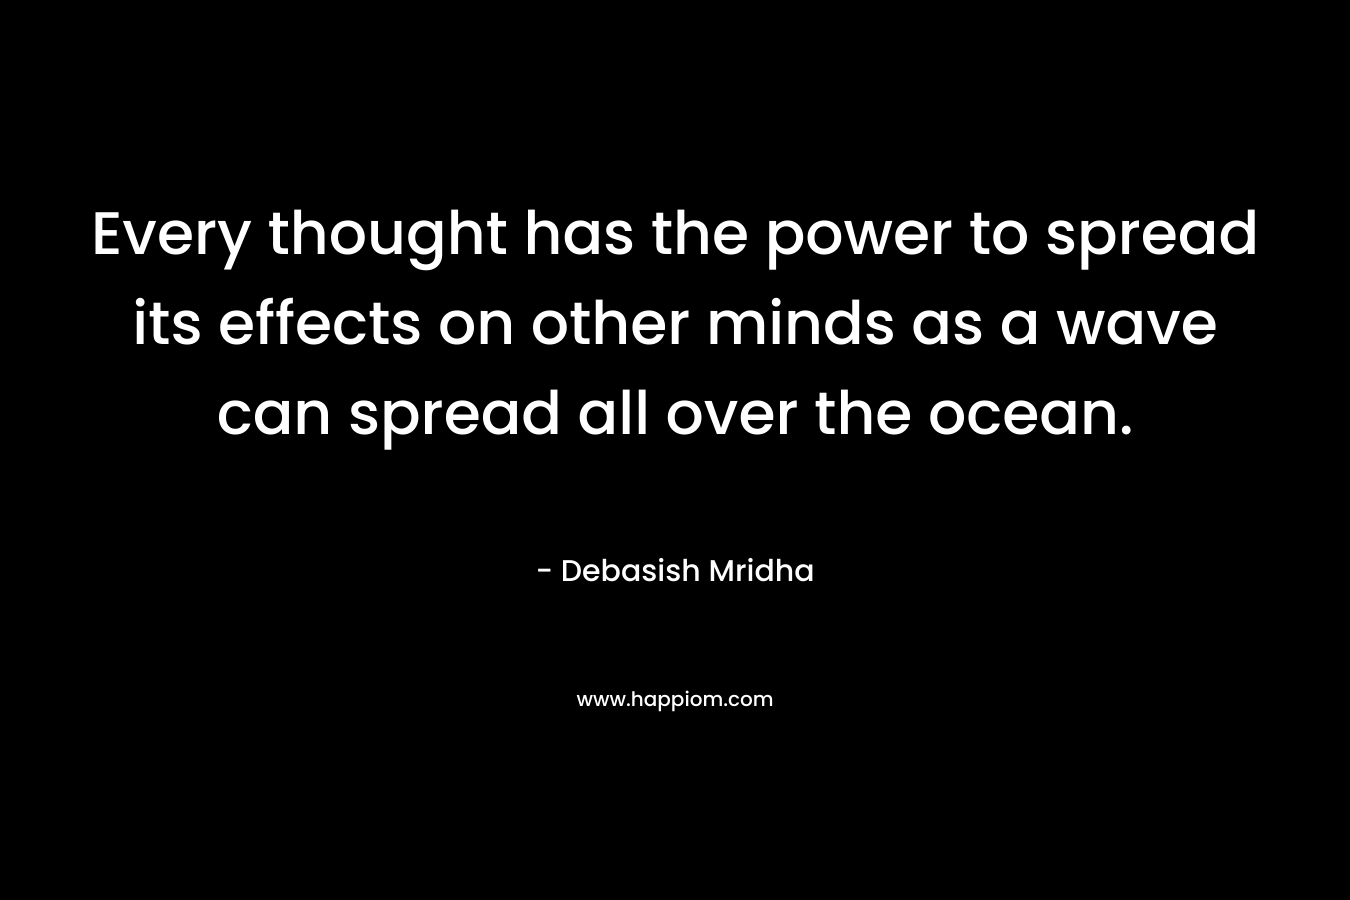 Every thought has the power to spread its effects on other minds as a wave can spread all over the ocean.